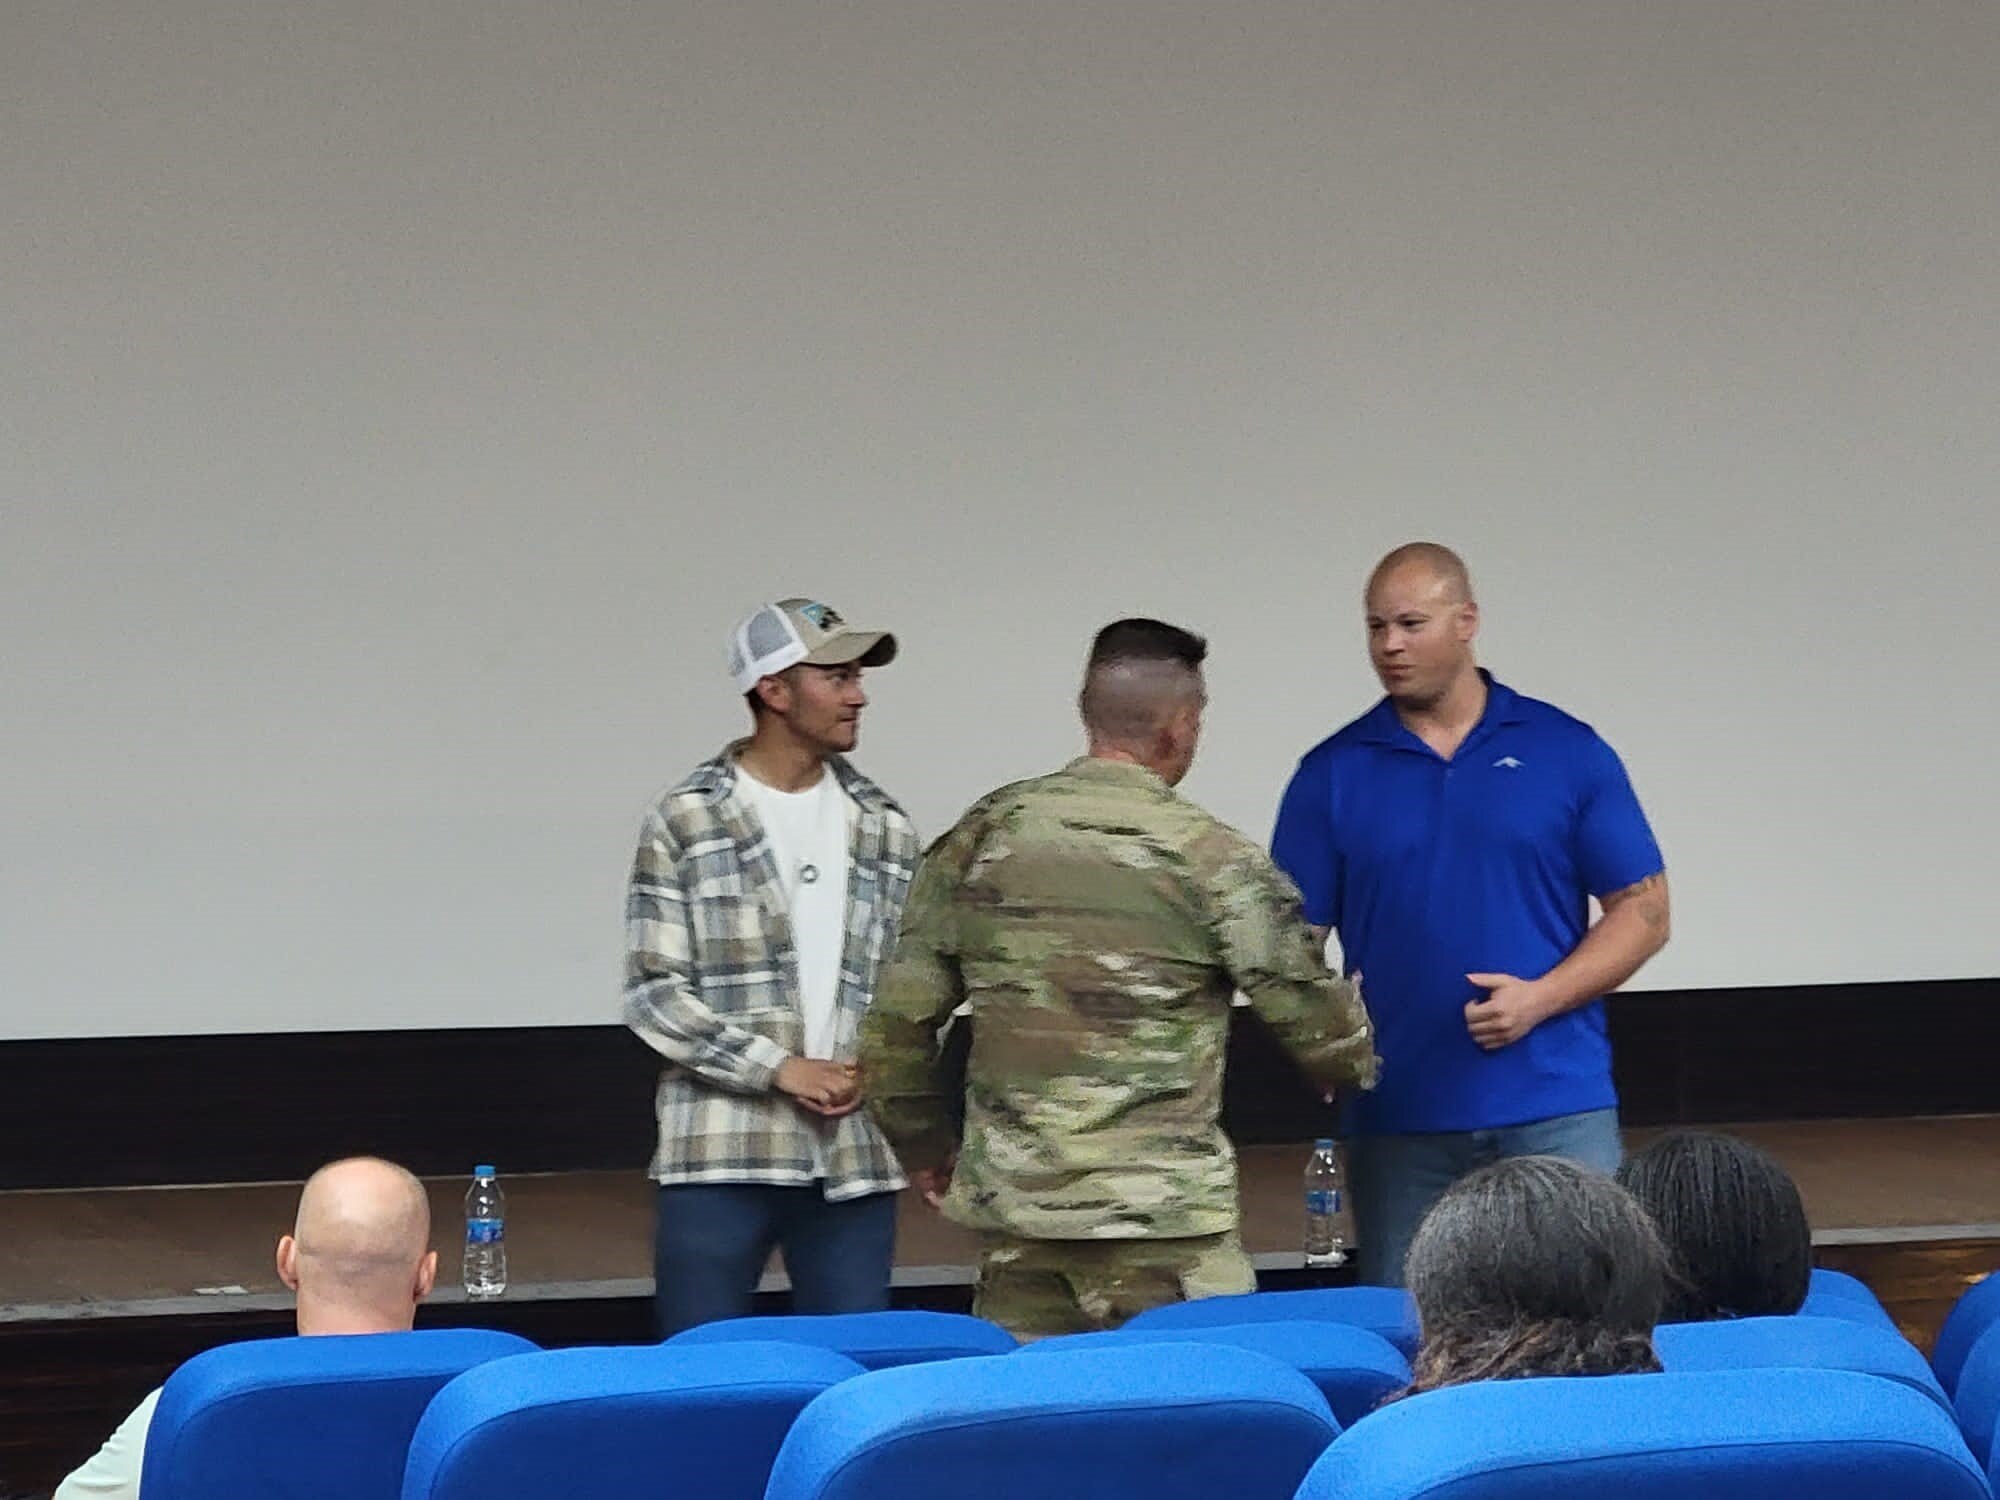 U.S. Air Force Staff Sgt. Kory Talbert accepts a challenge coin at an undisclosed location, July 23, 2022. He was coined in recognition of his contributions to the DOD Men's SAPR campaign, which trained and educated attendees to help male survivors of sexual assault. (Courtesy Asset)